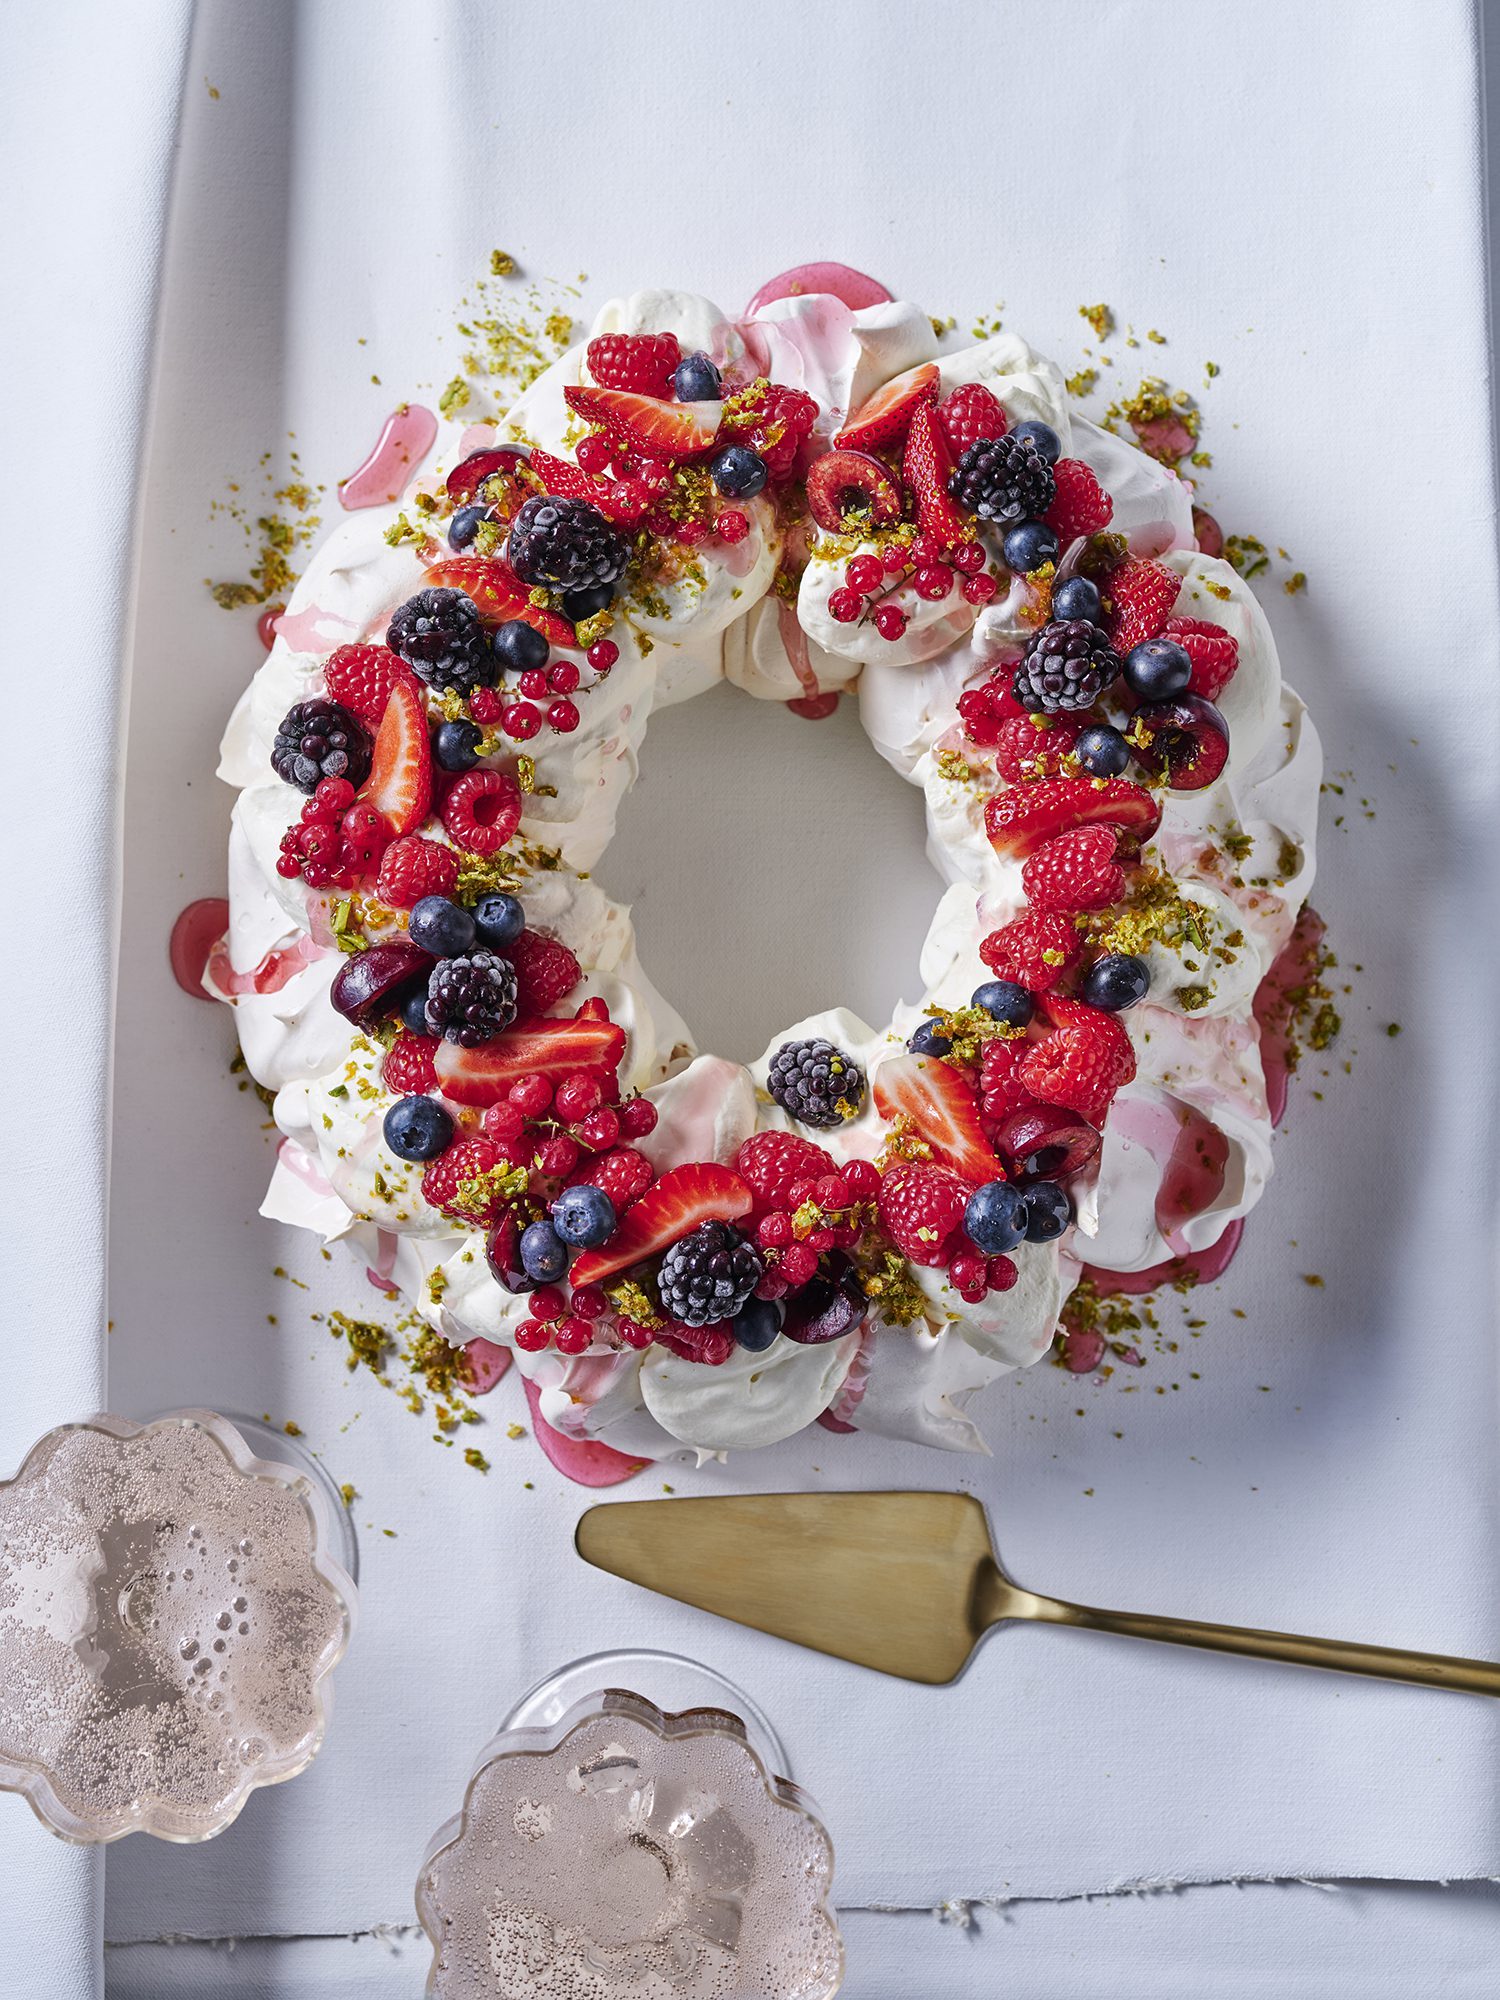 Festive Berry Wreath Pavlova with Pink Prosecco Syrup and Candied Pistachios